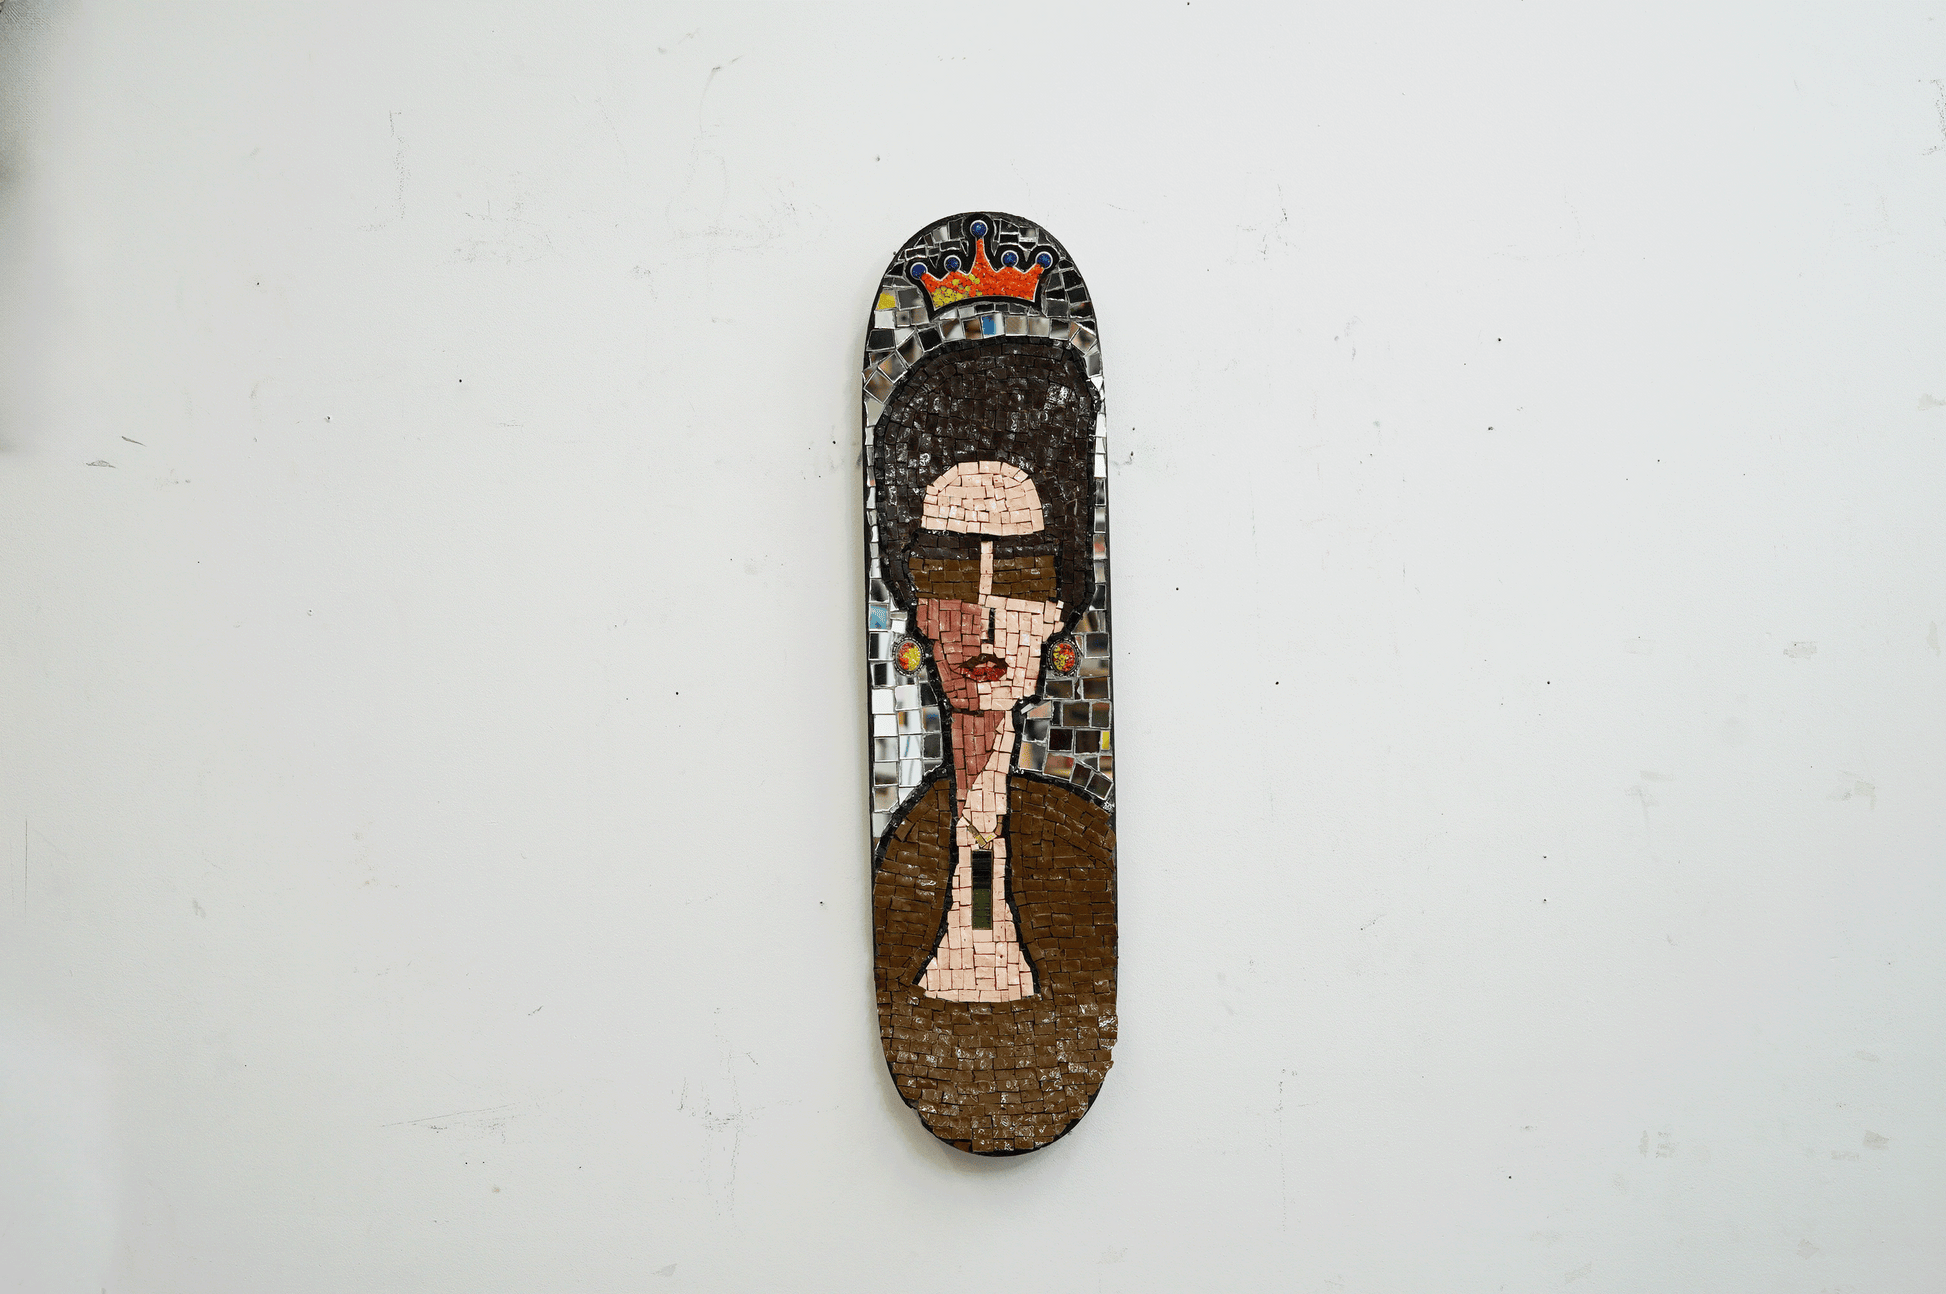 mosaic on a skateboard of a sophisticated woman with jewelry , big hair and sunglasses